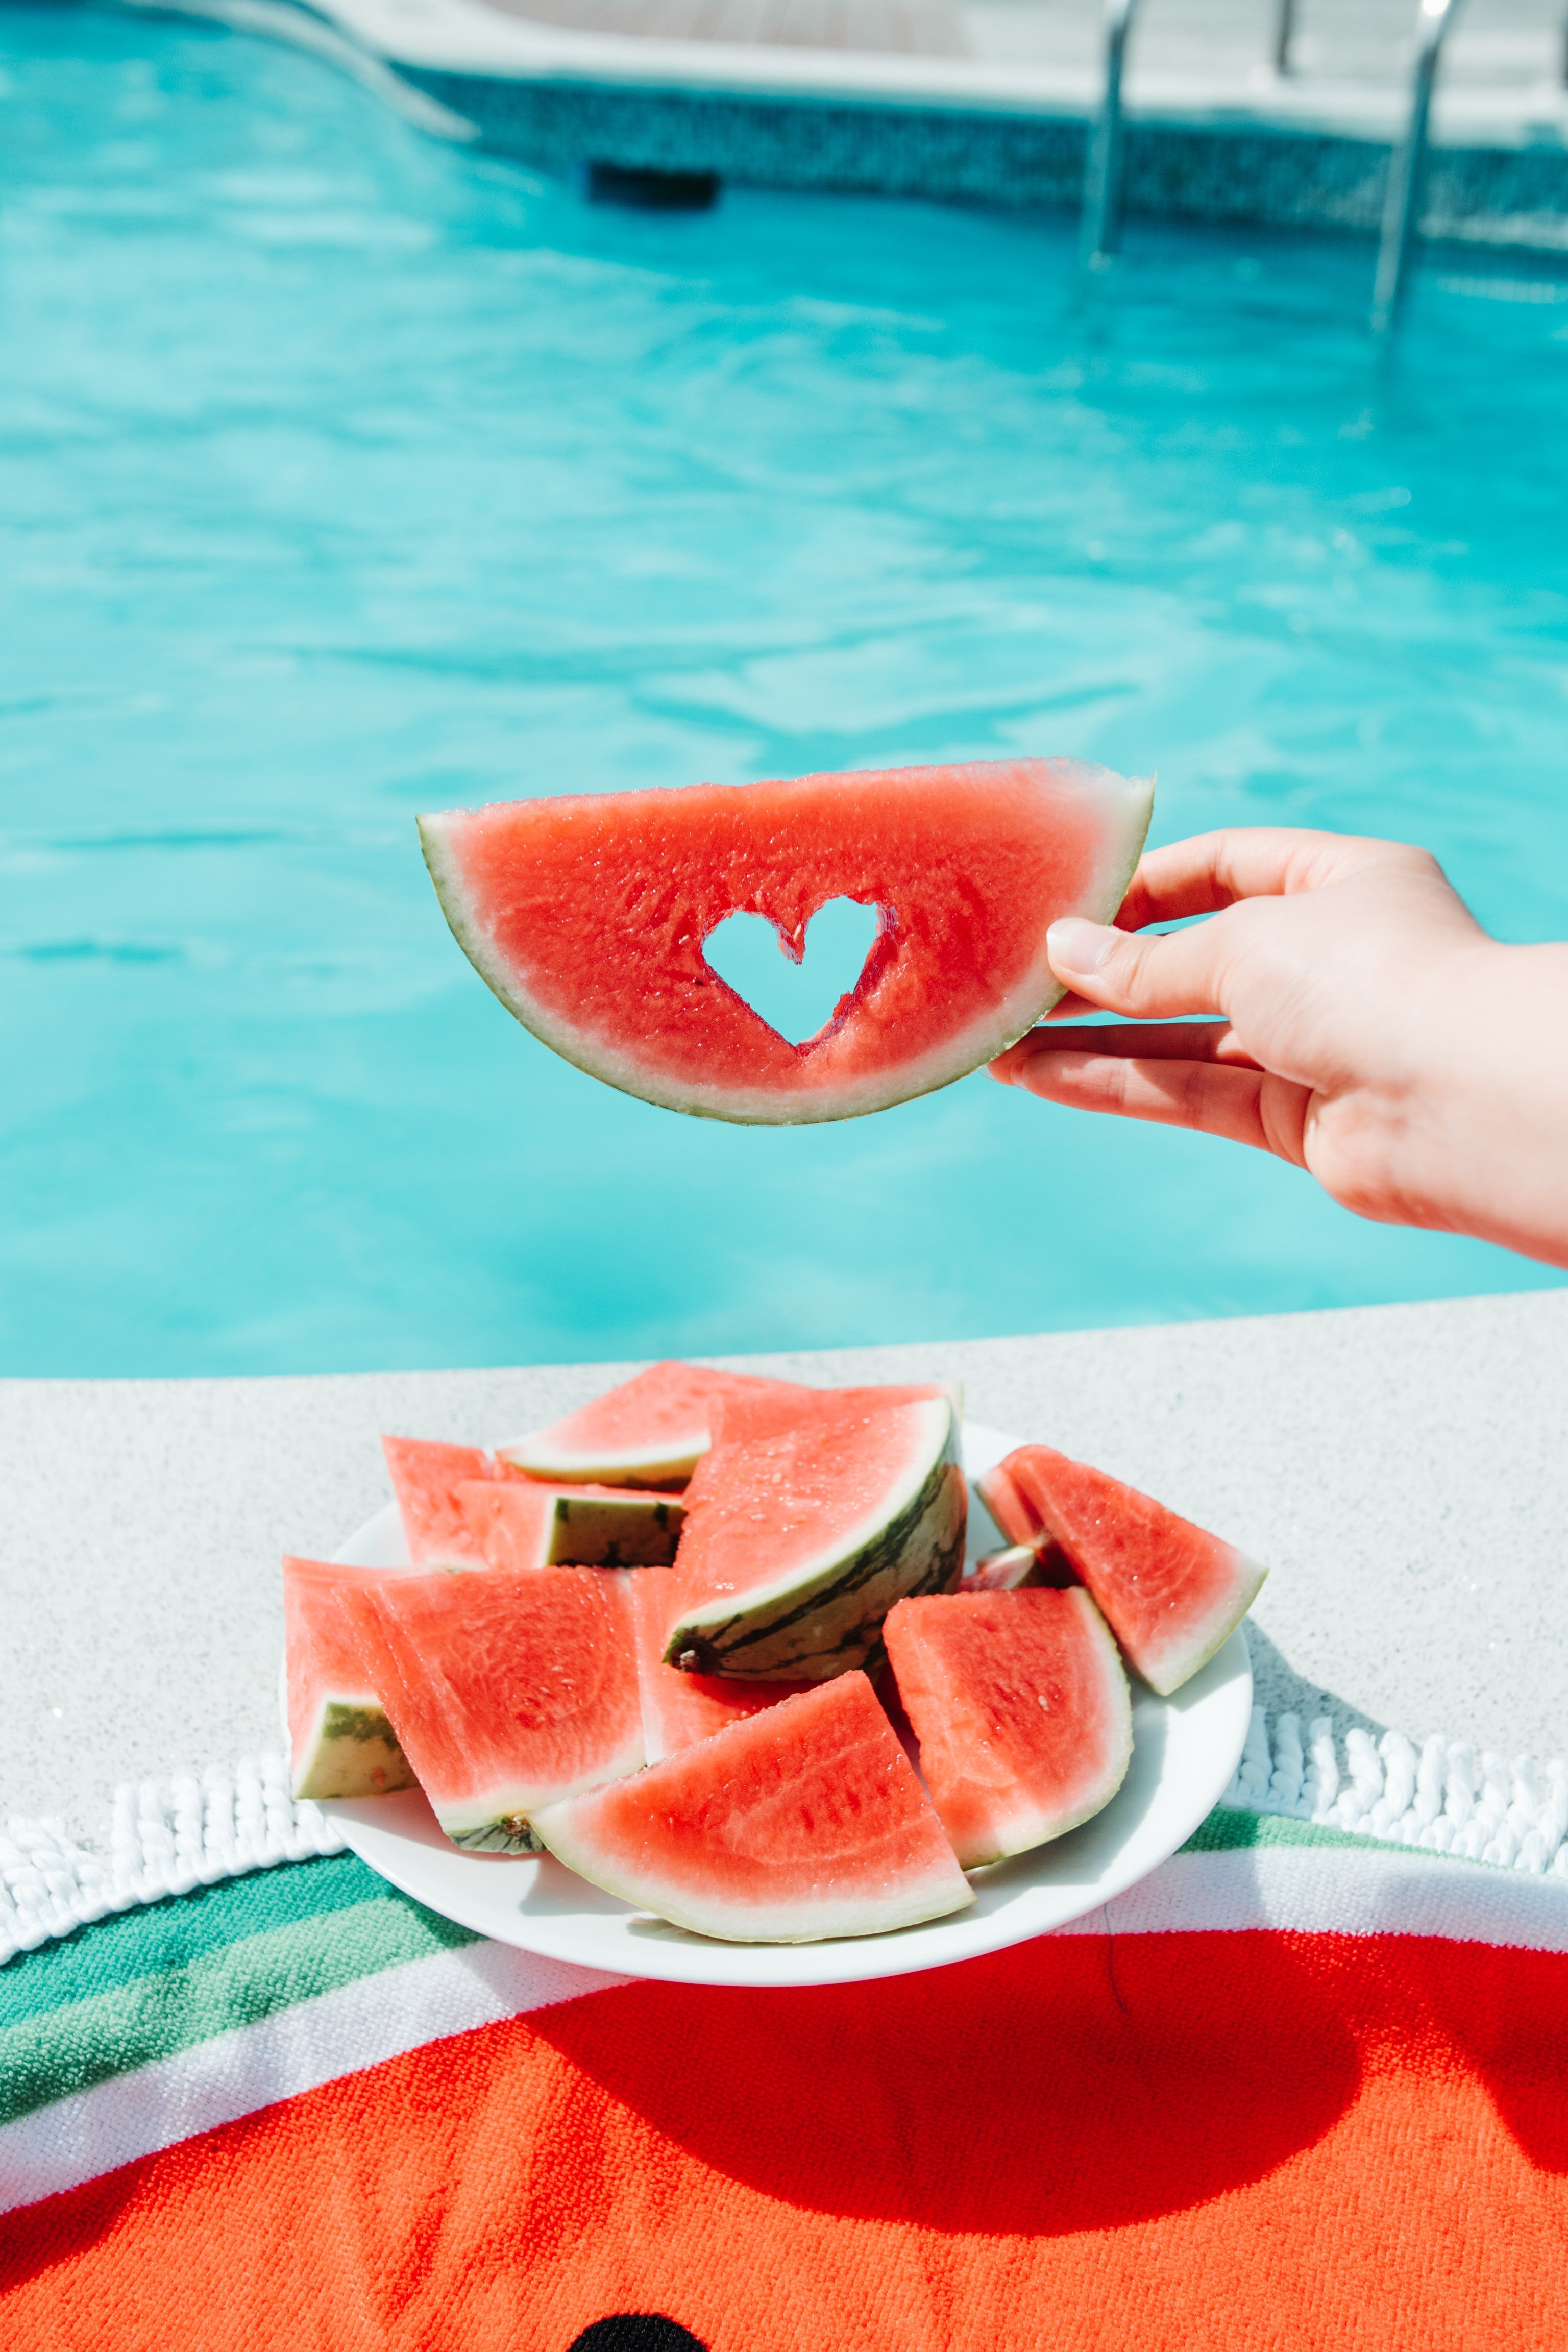 What You Need to Celebrate National Watermelon Day to the Fullest